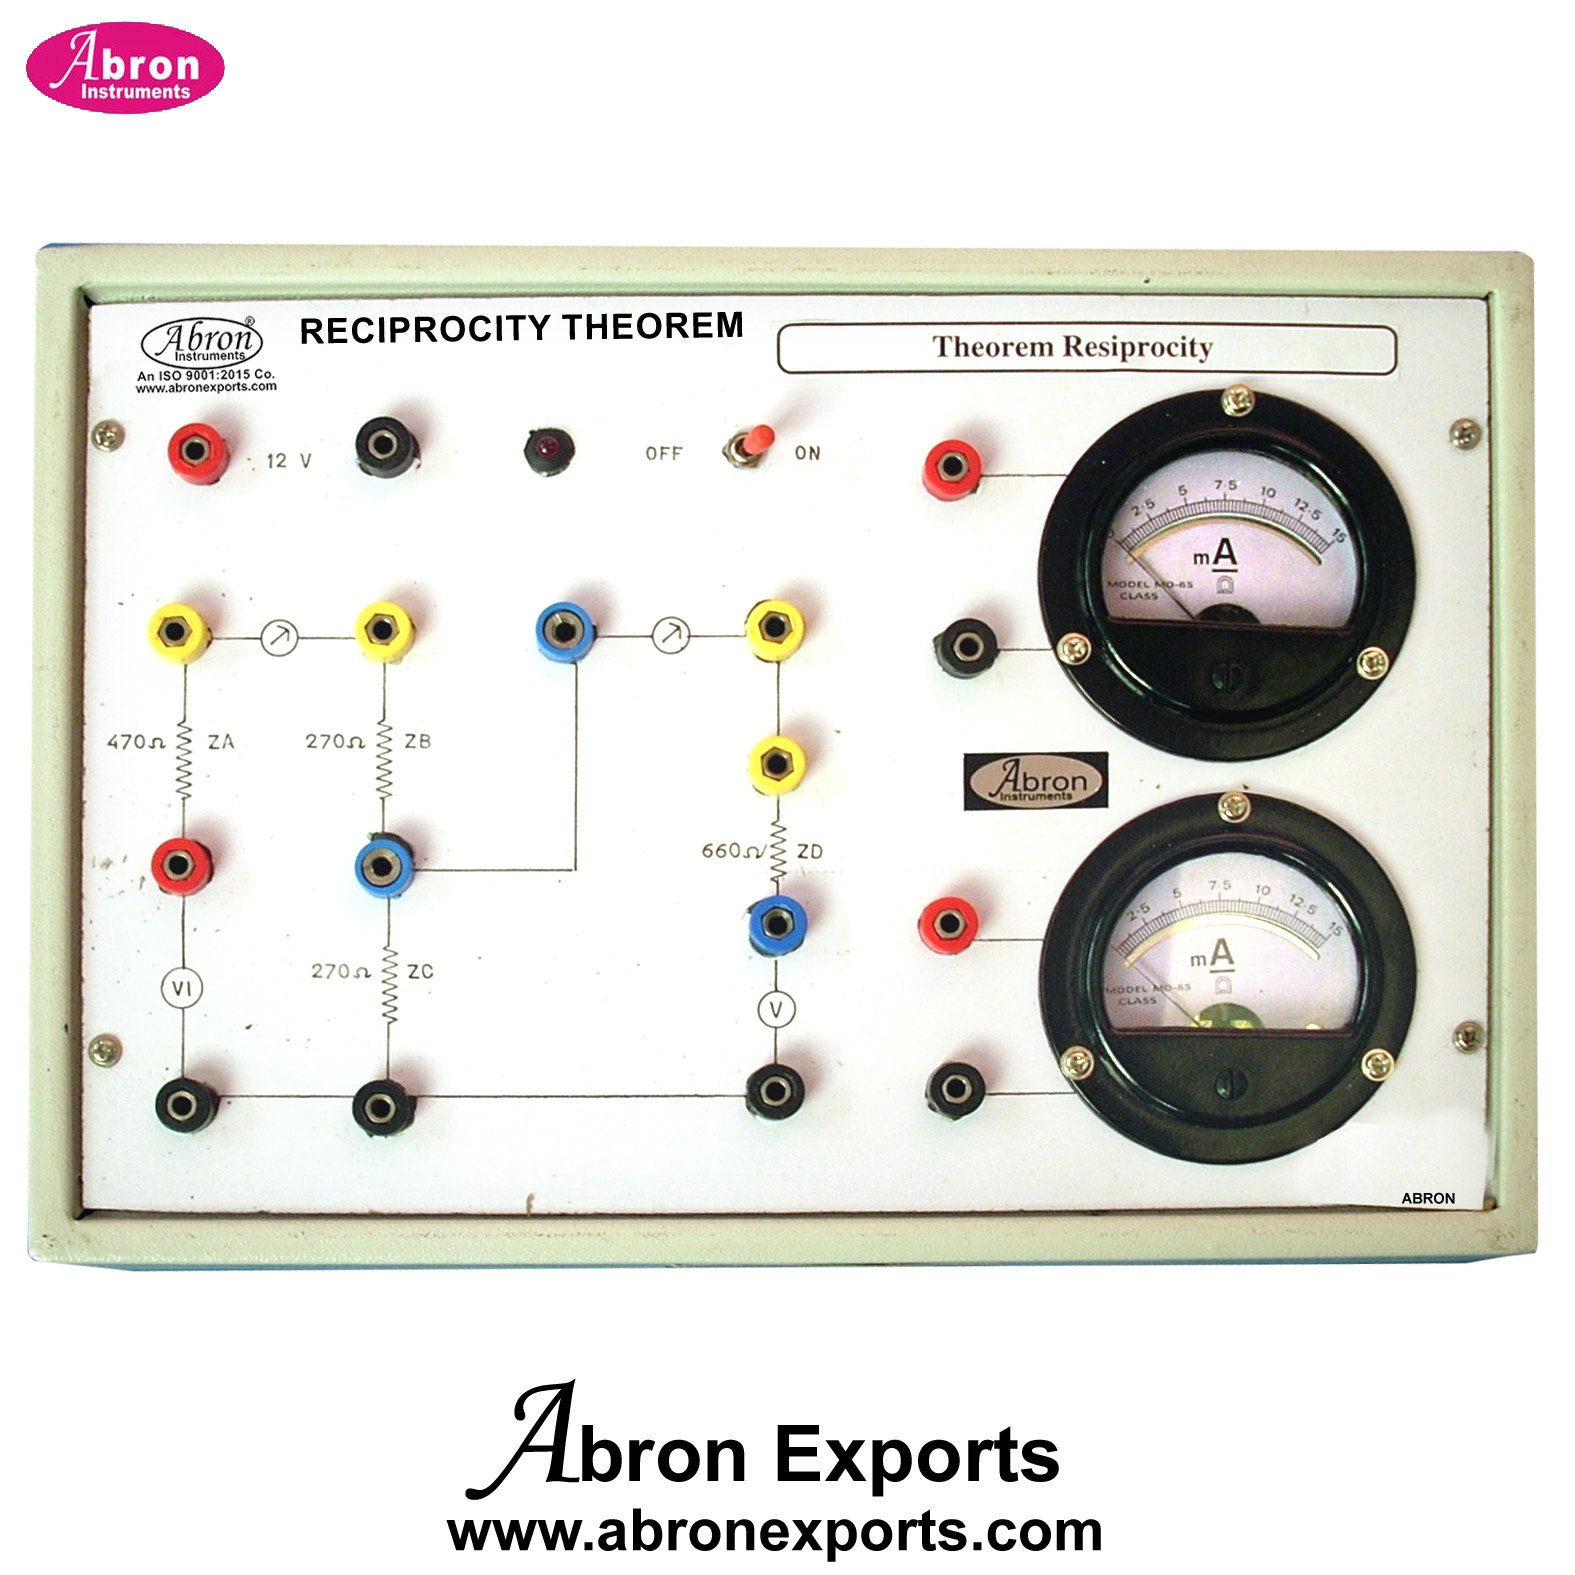 Study Theorem Reciprocity Theorem With Power Supply 2 Meters Electronic Trainer Kit Abron AE-1430REA 